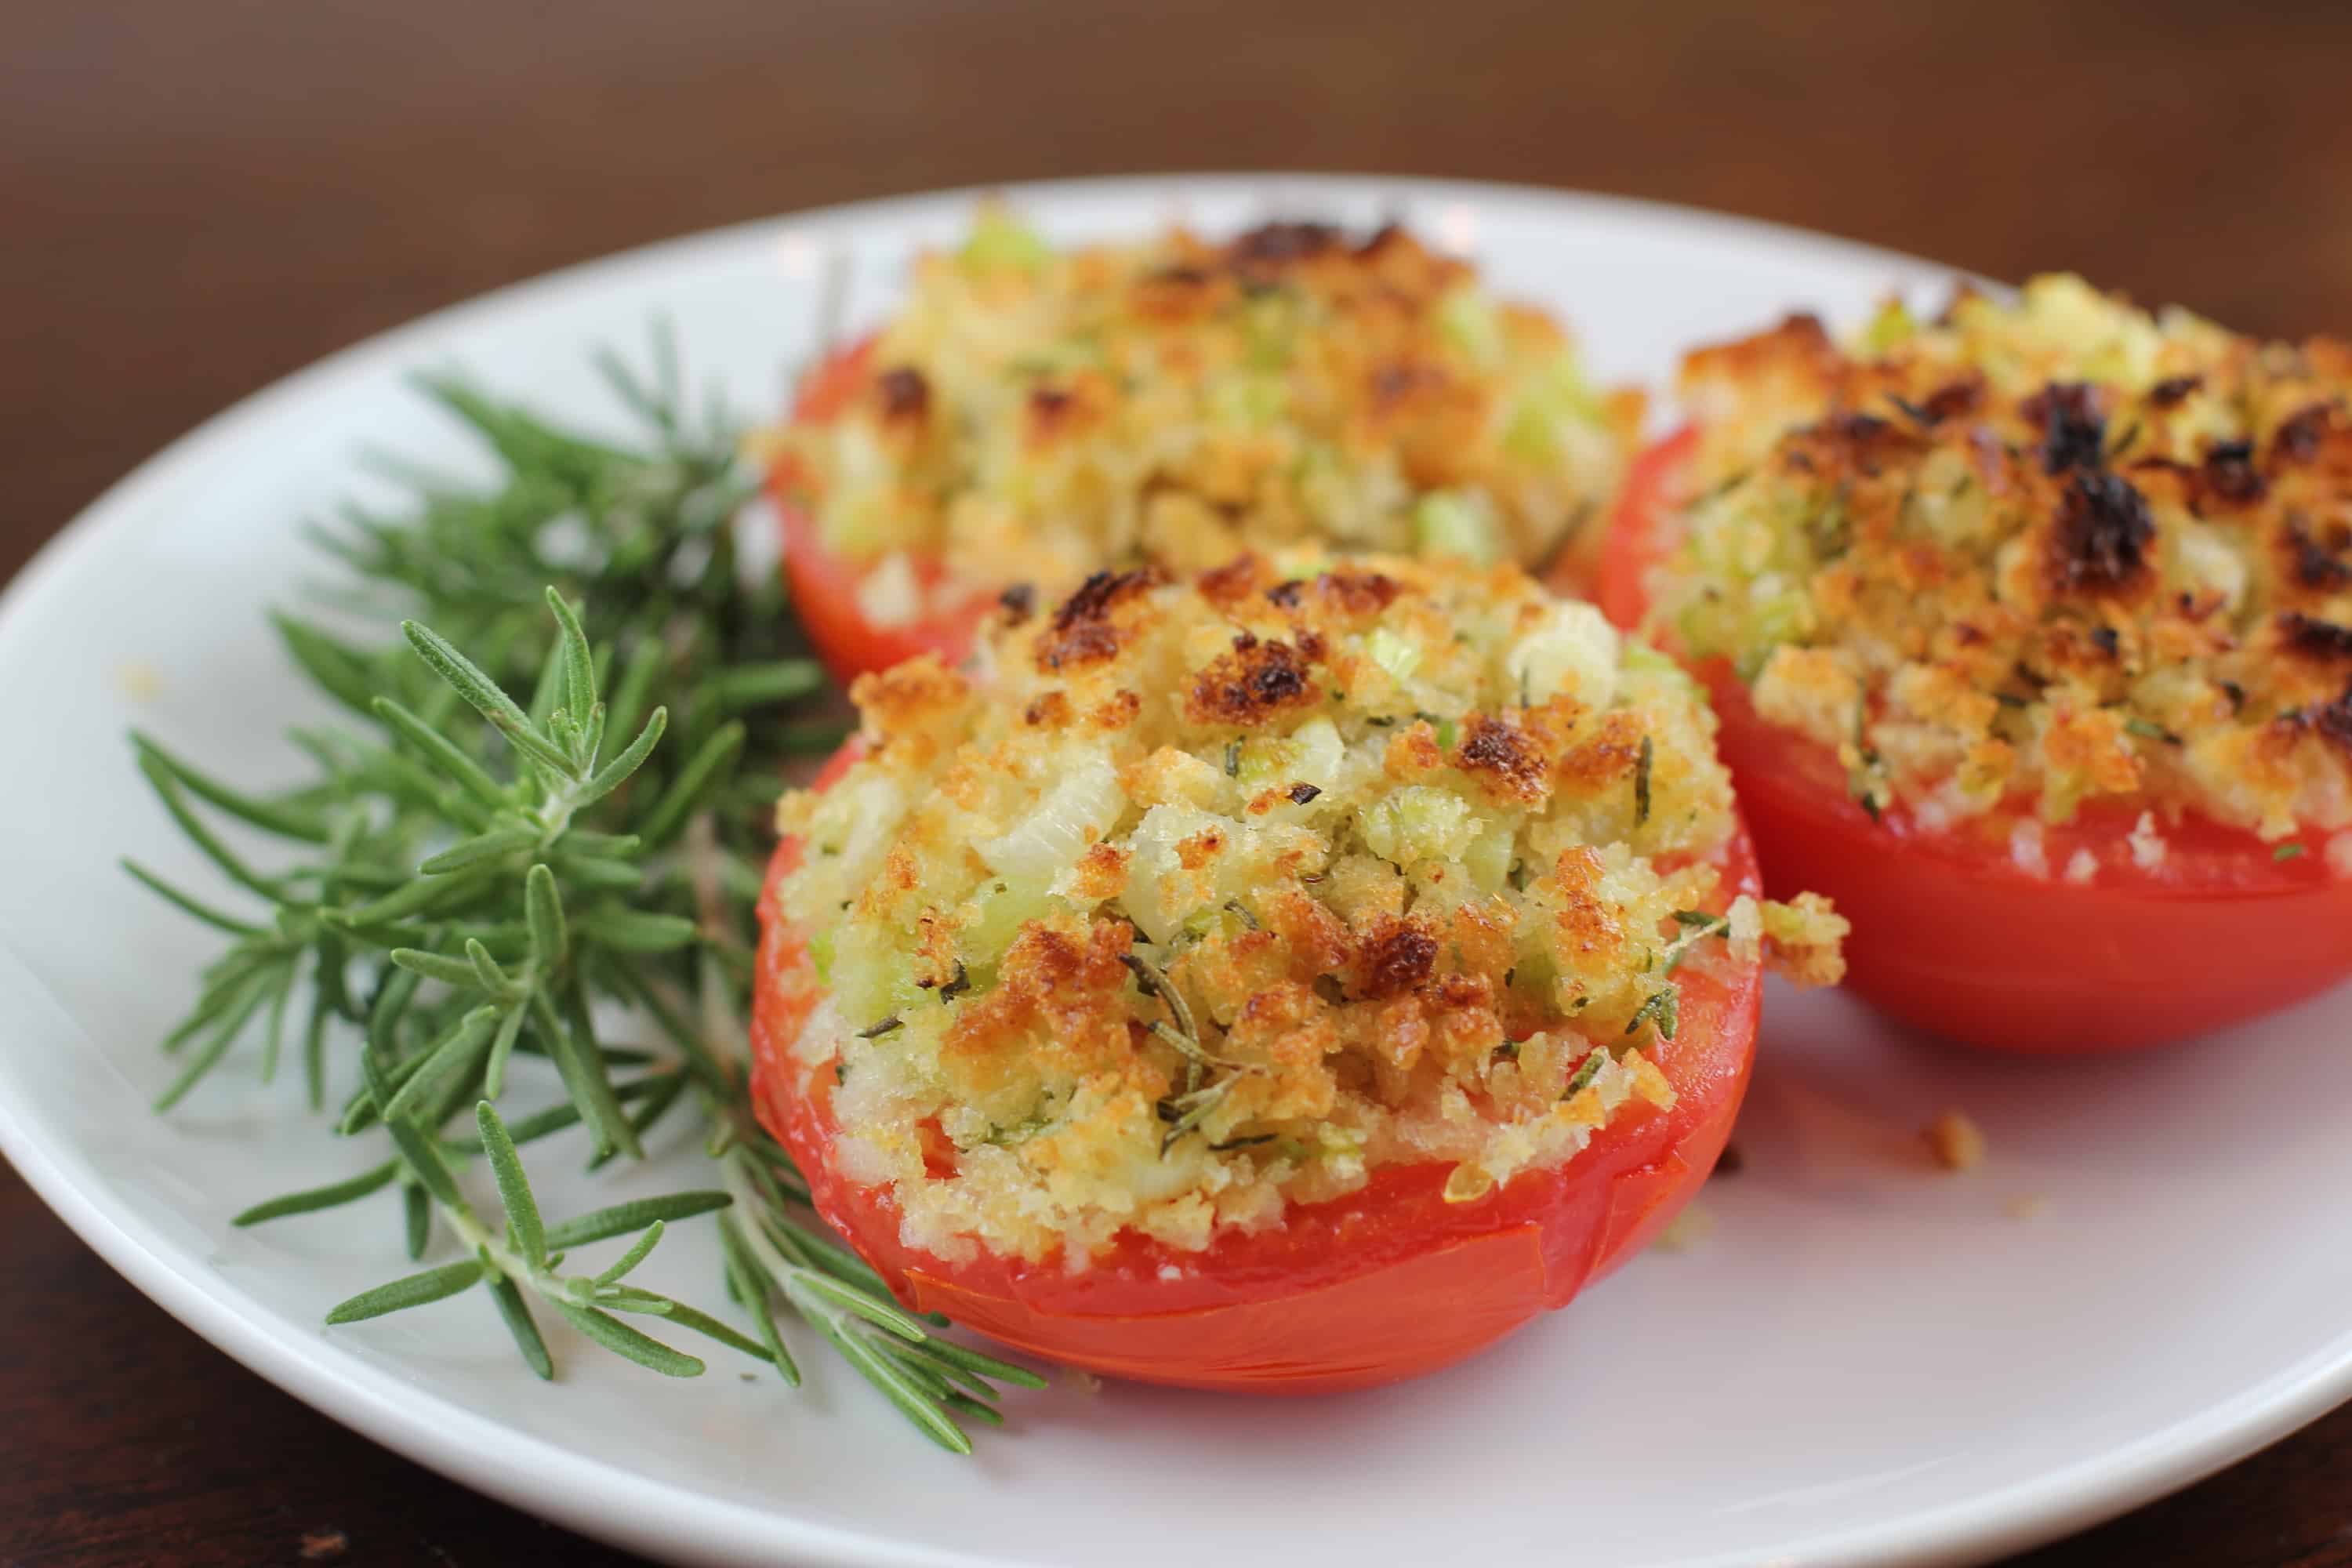 Rosemary broiled tomatoes